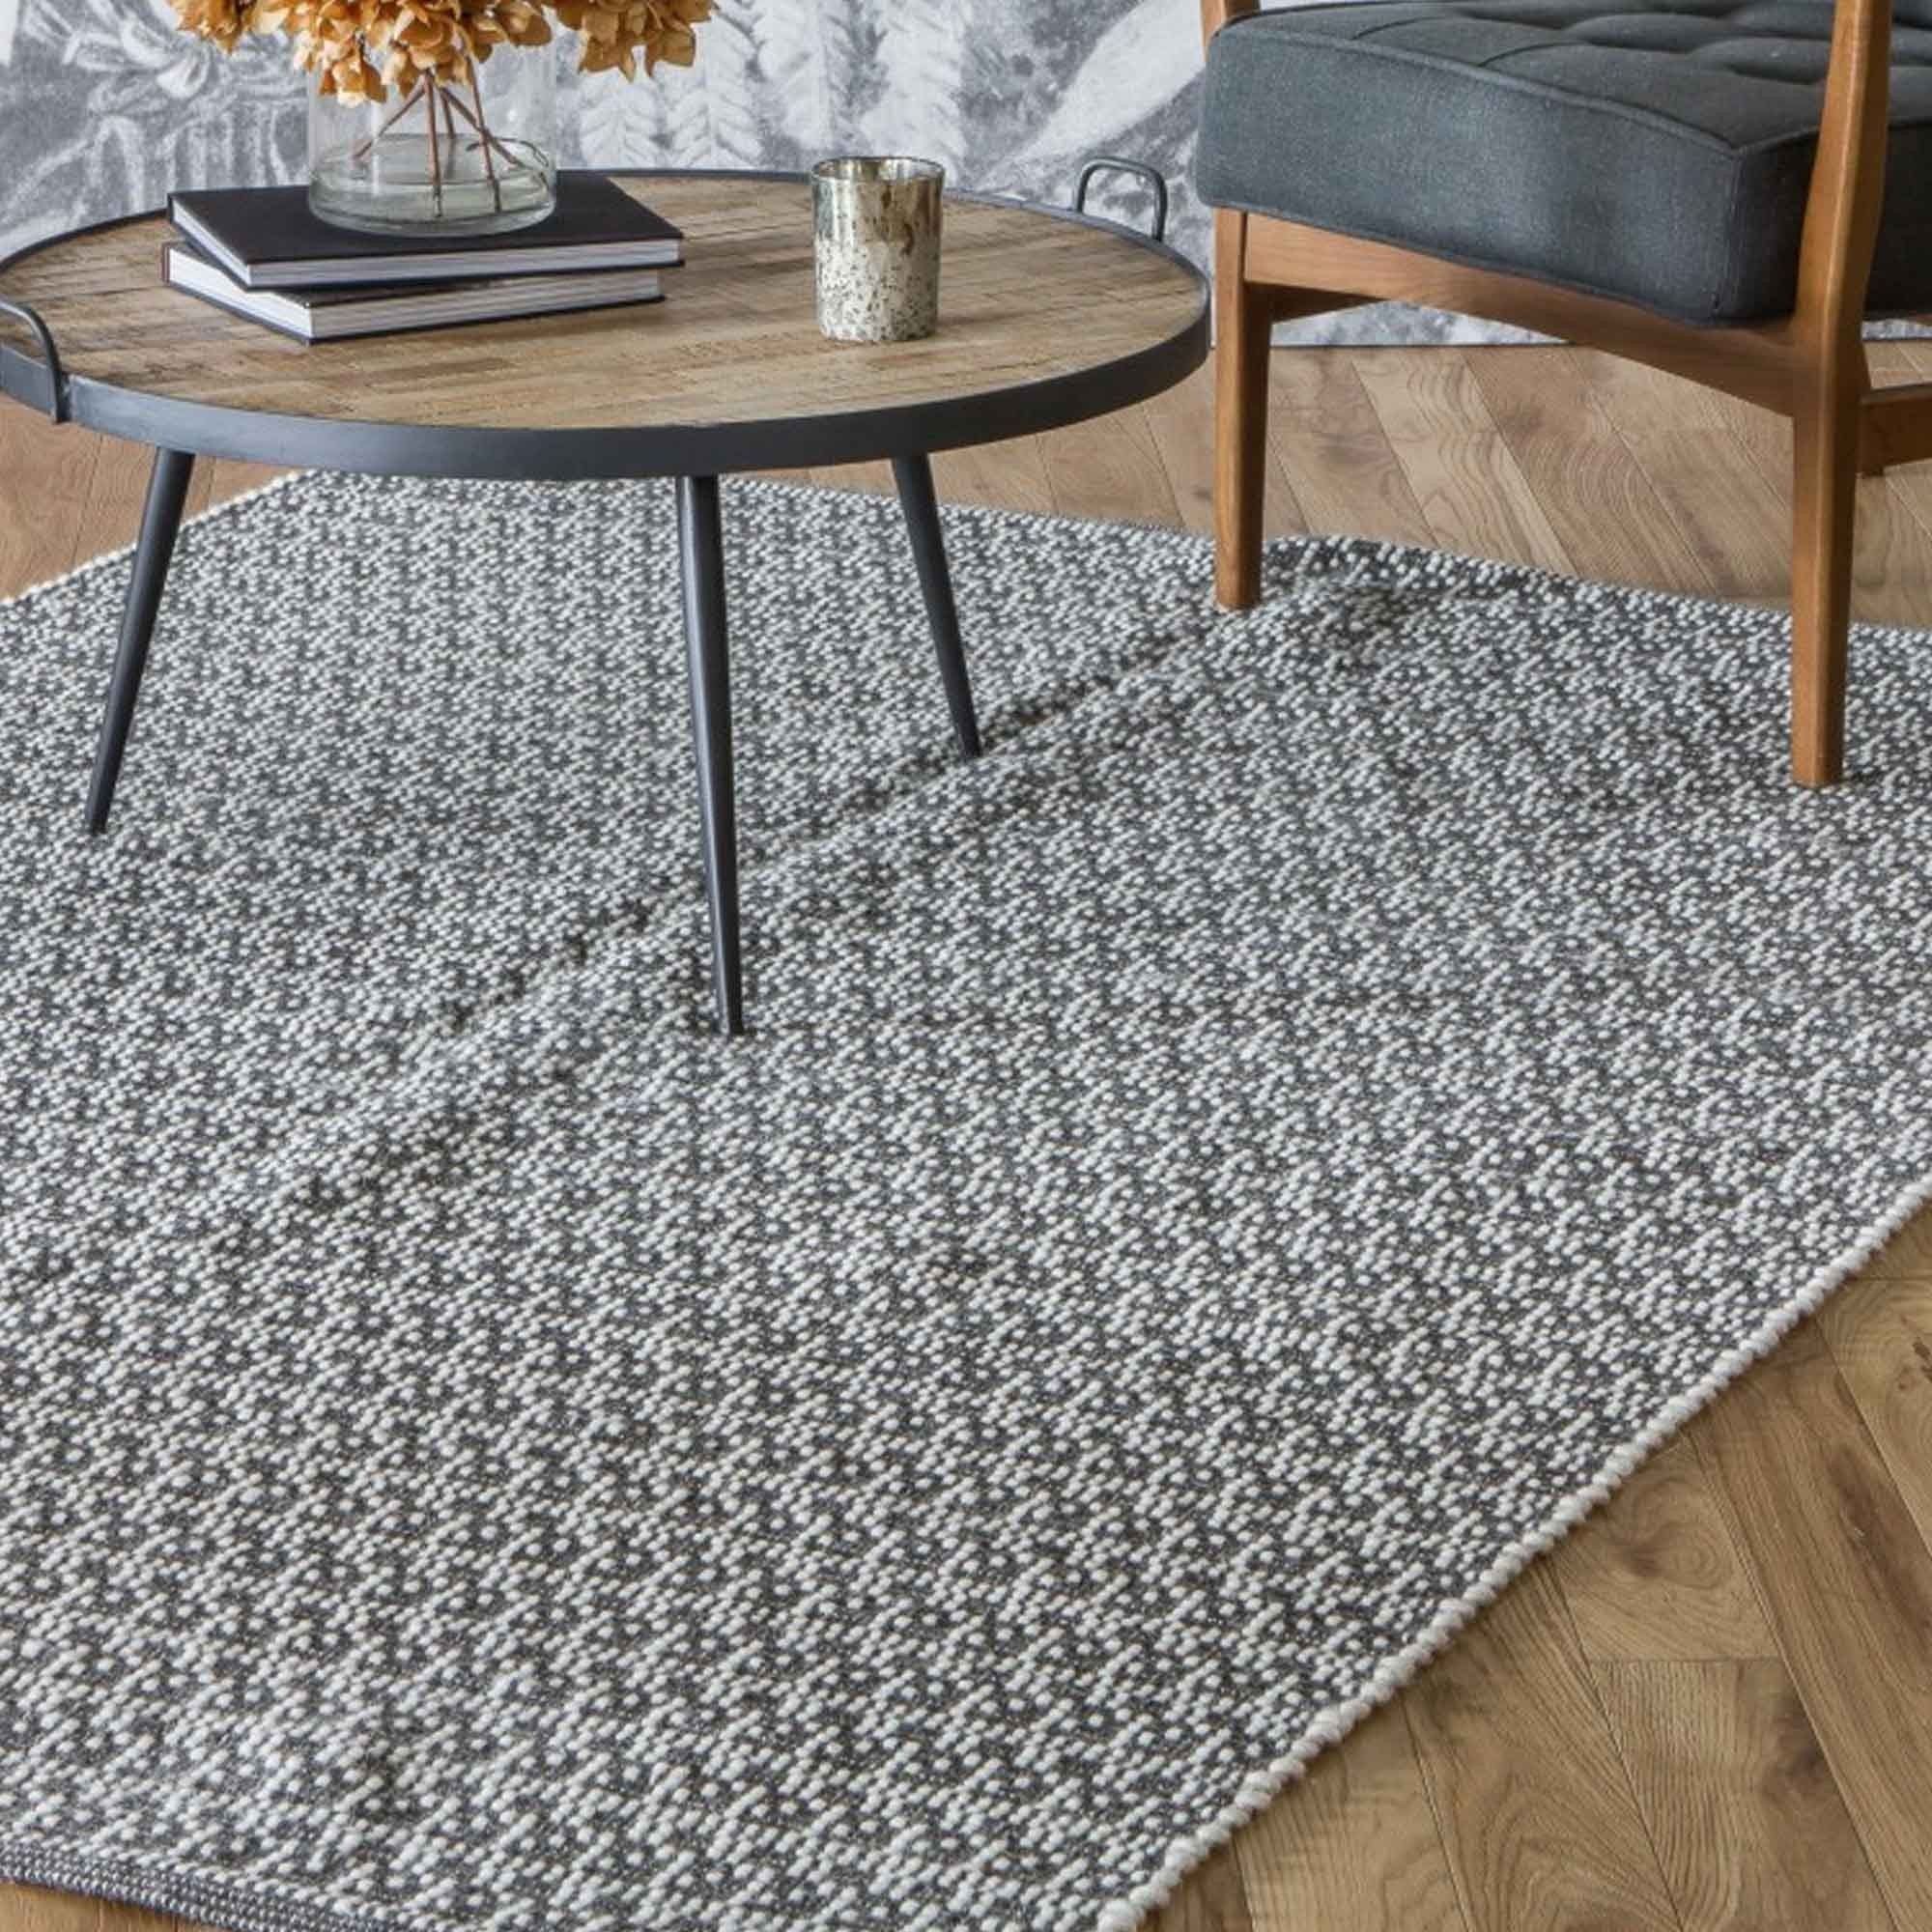 Connaught Rug Charcoal | Pattern Rug | Grey Rug | Textured Rug Inside Charcoal Rugs (View 5 of 15)